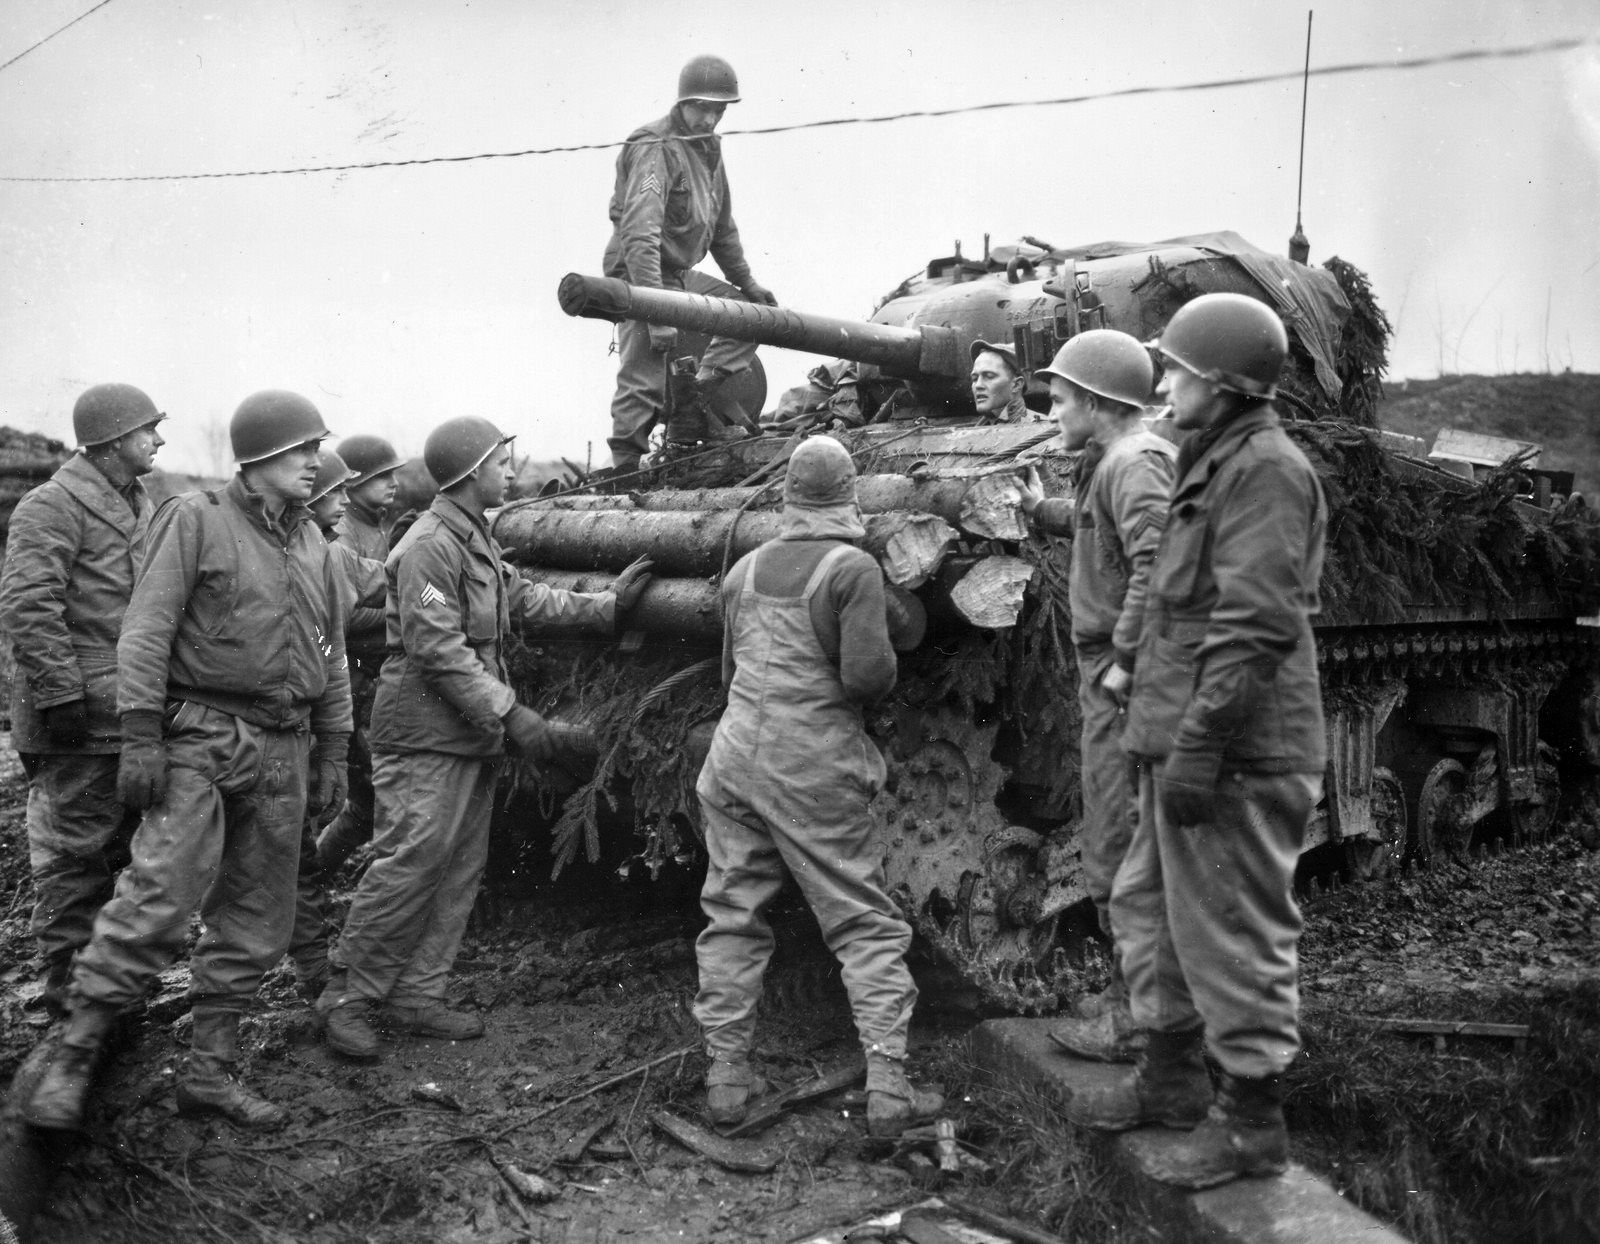 American soldiers of the 9th Infantry Division assist tankers in attaching logs to their tank as additional protection against enemy fire. Matt Urban served with the 60th Infantry Regiment, which was attached to the 1st Armored Division during the campaign in North Africa.